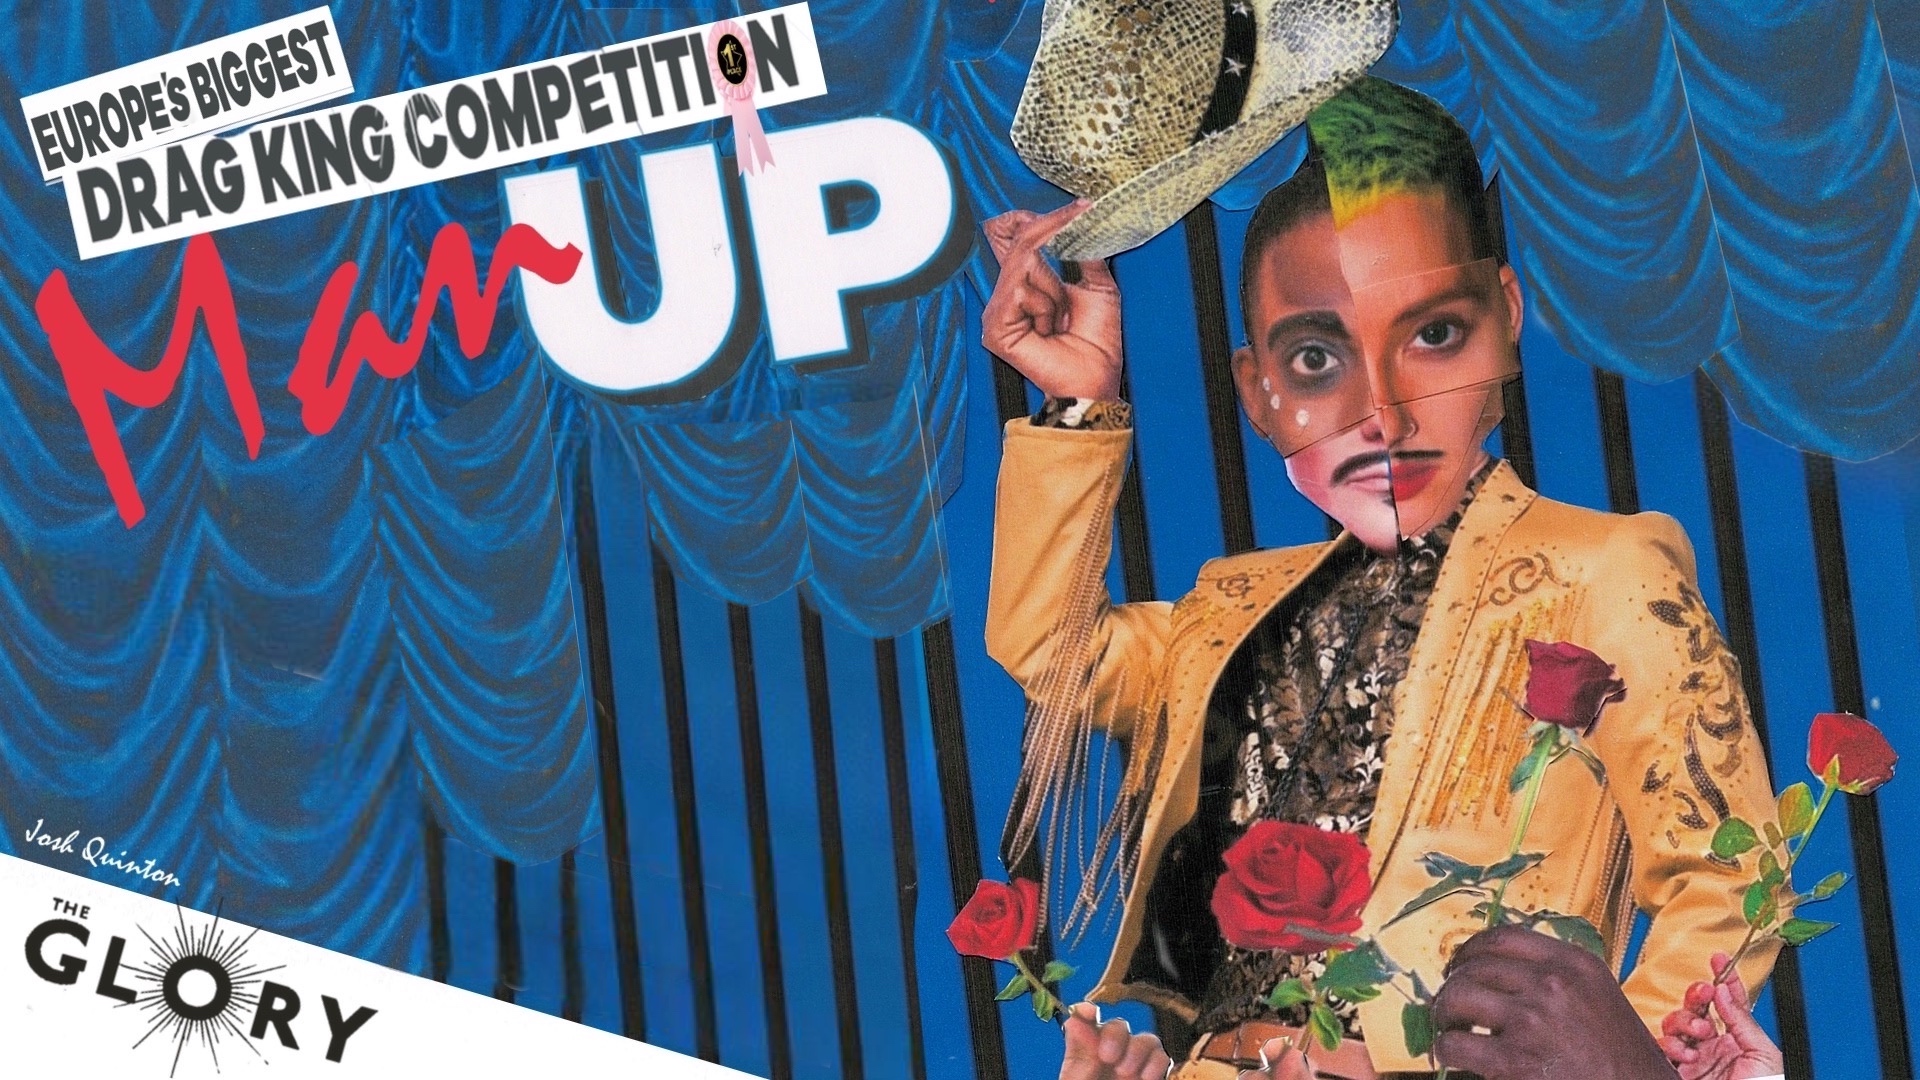 Man Up! Drag King Competition – HEAT 4